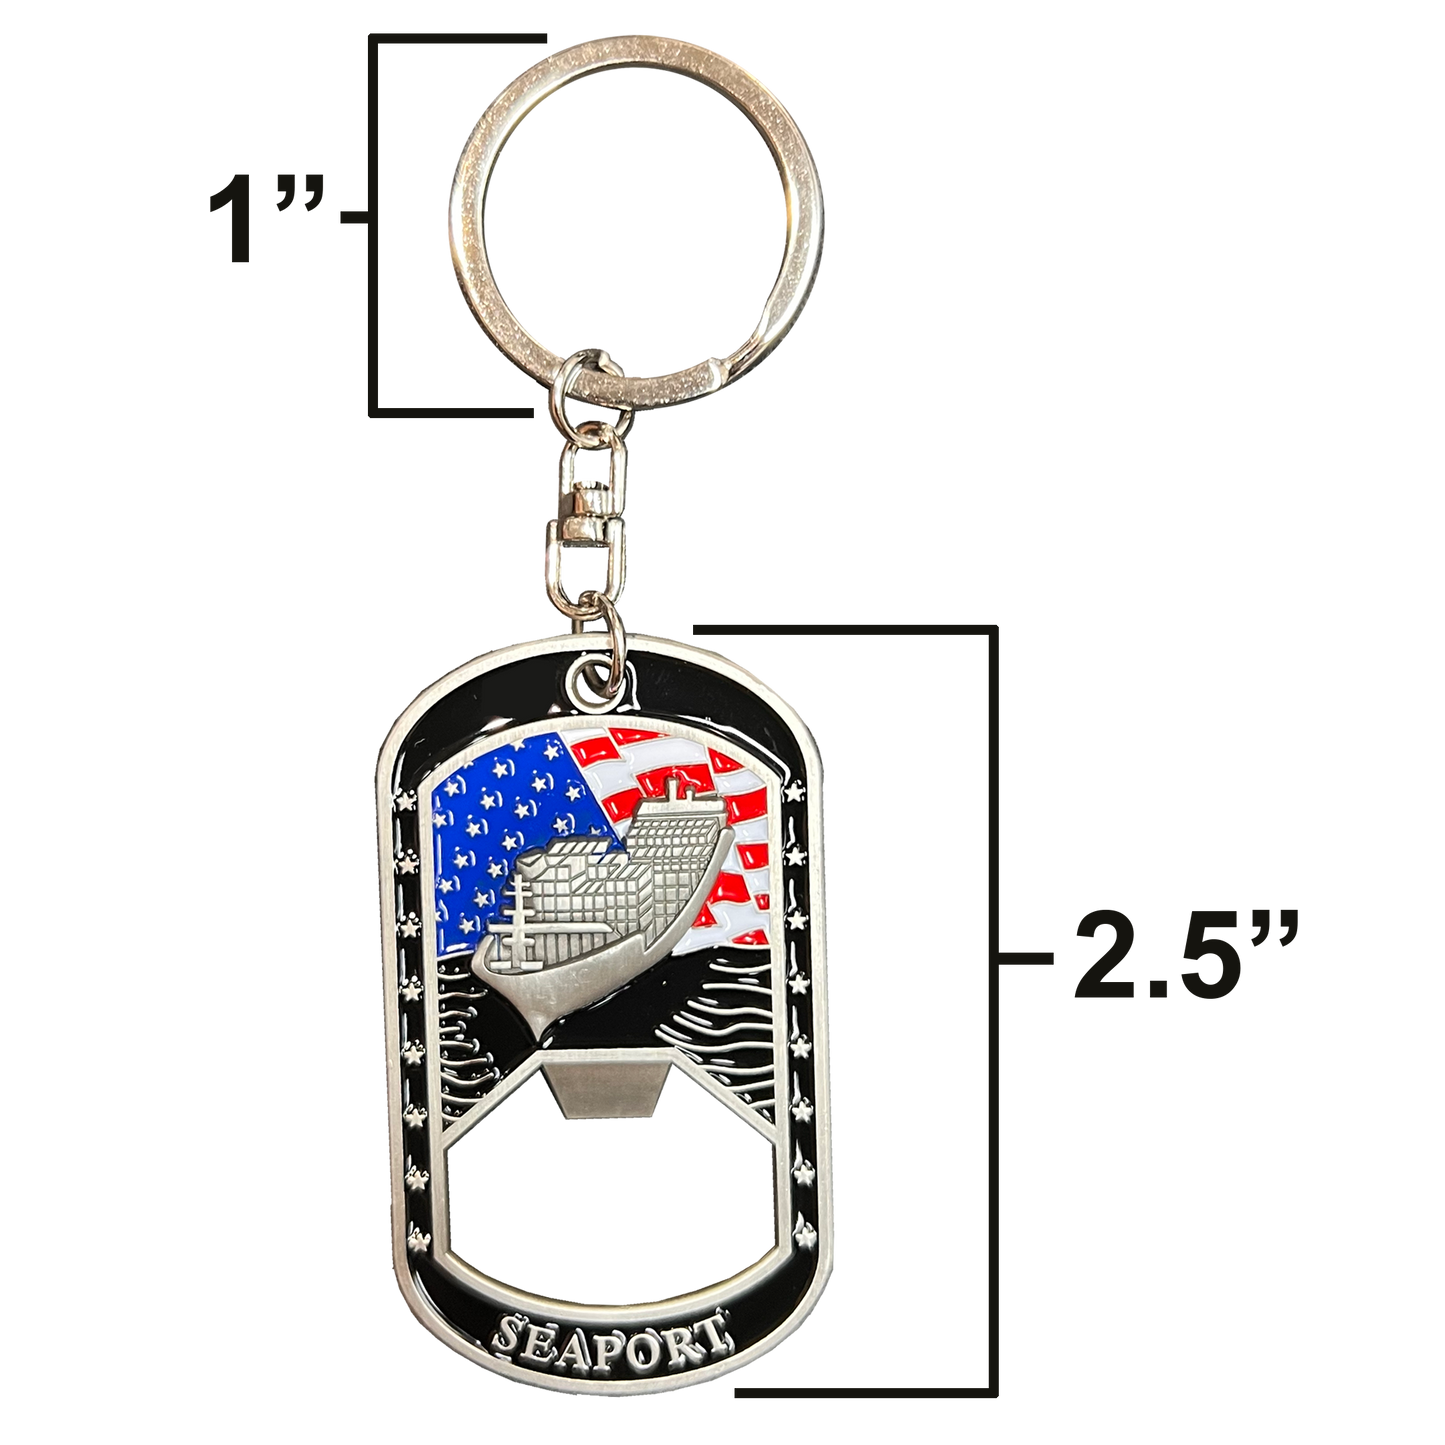 GL9-008 CBP Officer OFO Seaport A-TCET Trade Cruise Ship Passenger Challenge Coin Keychain Bottle Opener